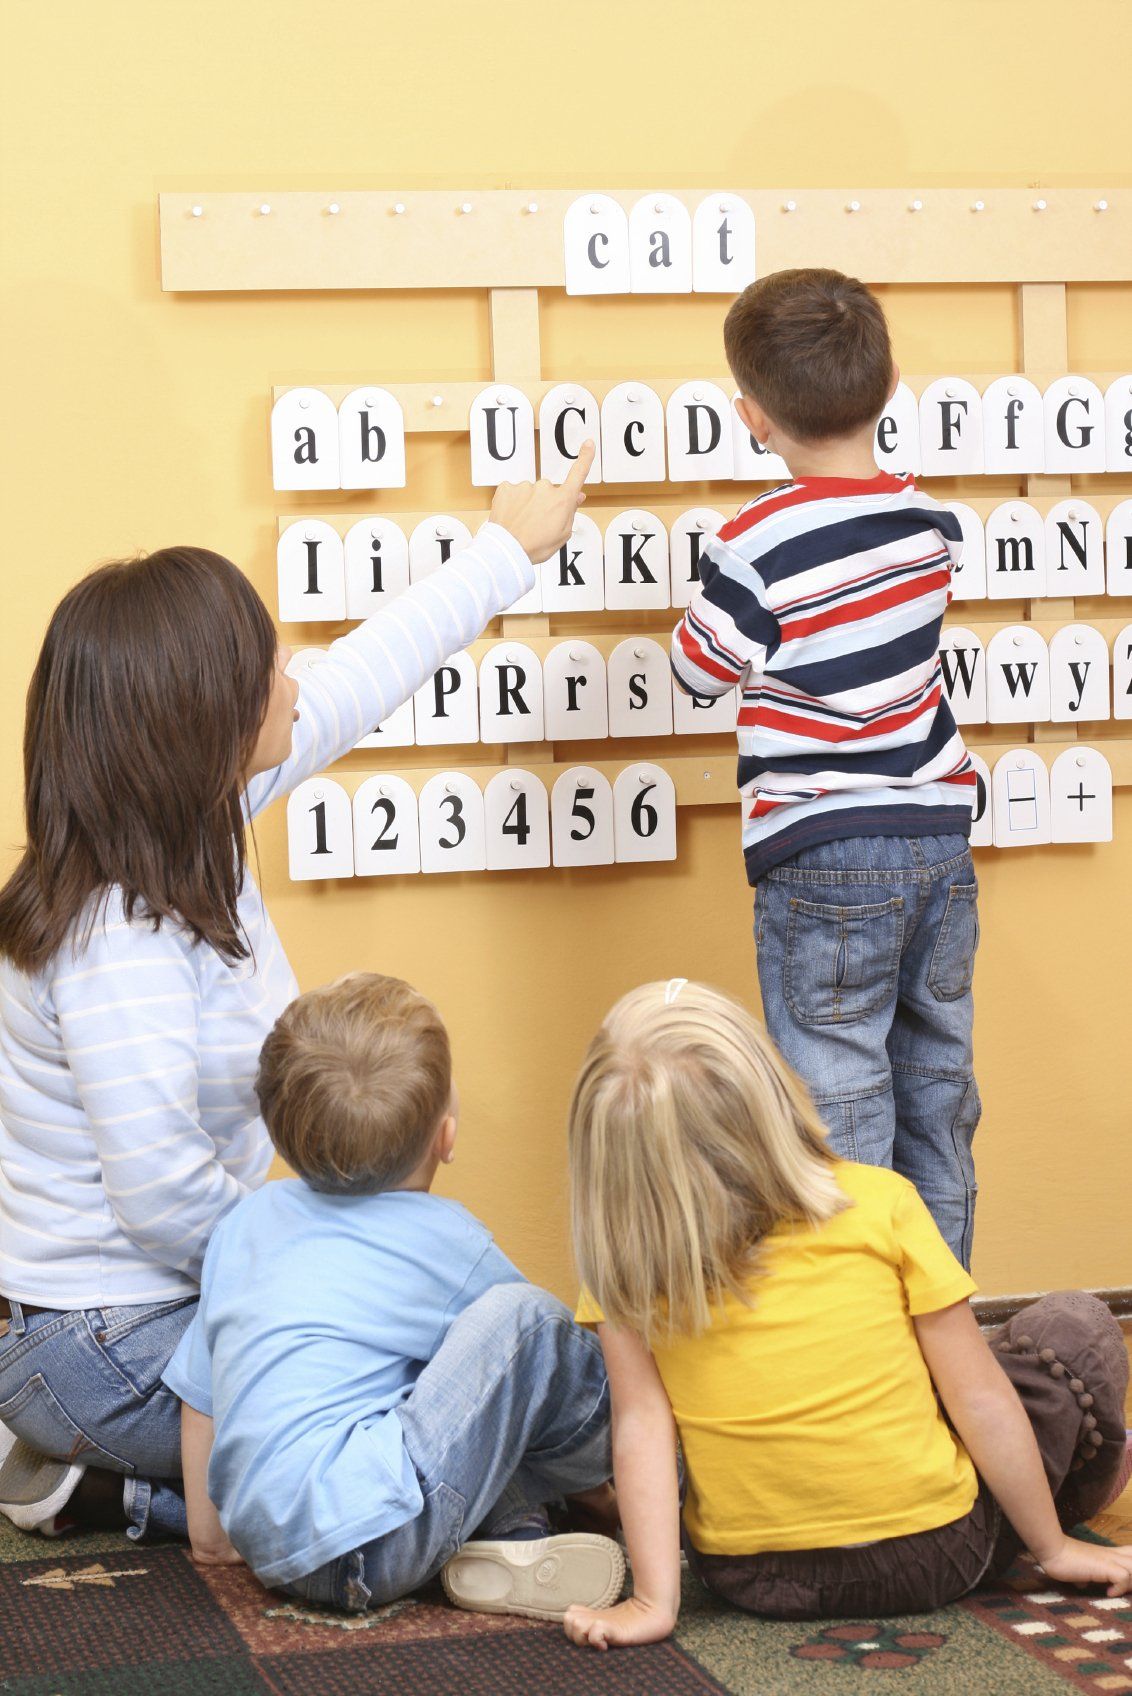 Teacher and two little kits sitting on floor while third kid arranges letters and numbers on  a wall rck.